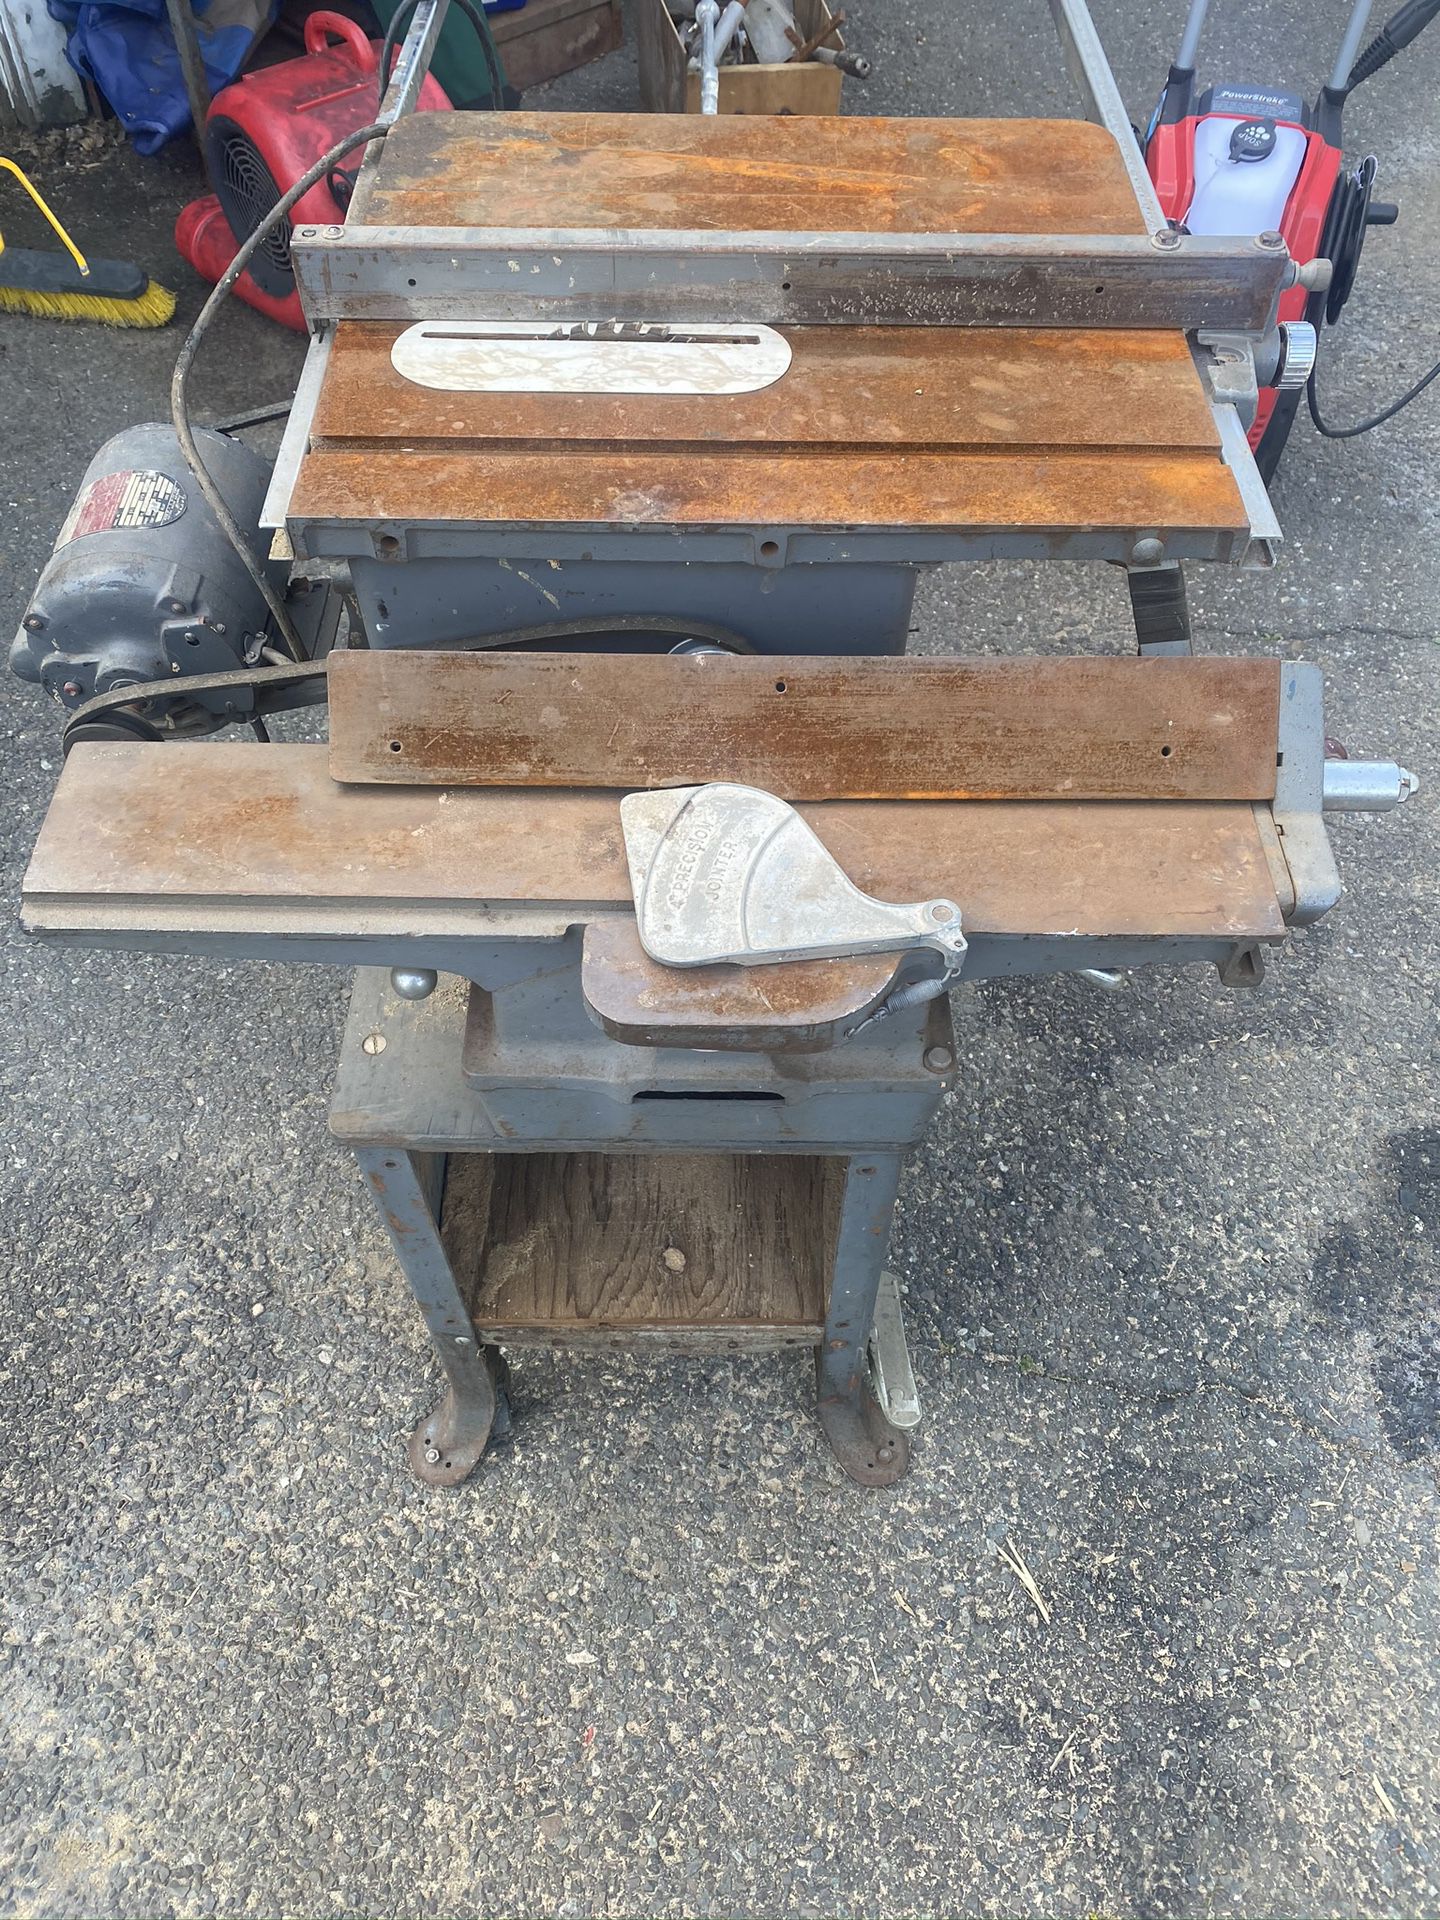 Table saw, plainer with accessories